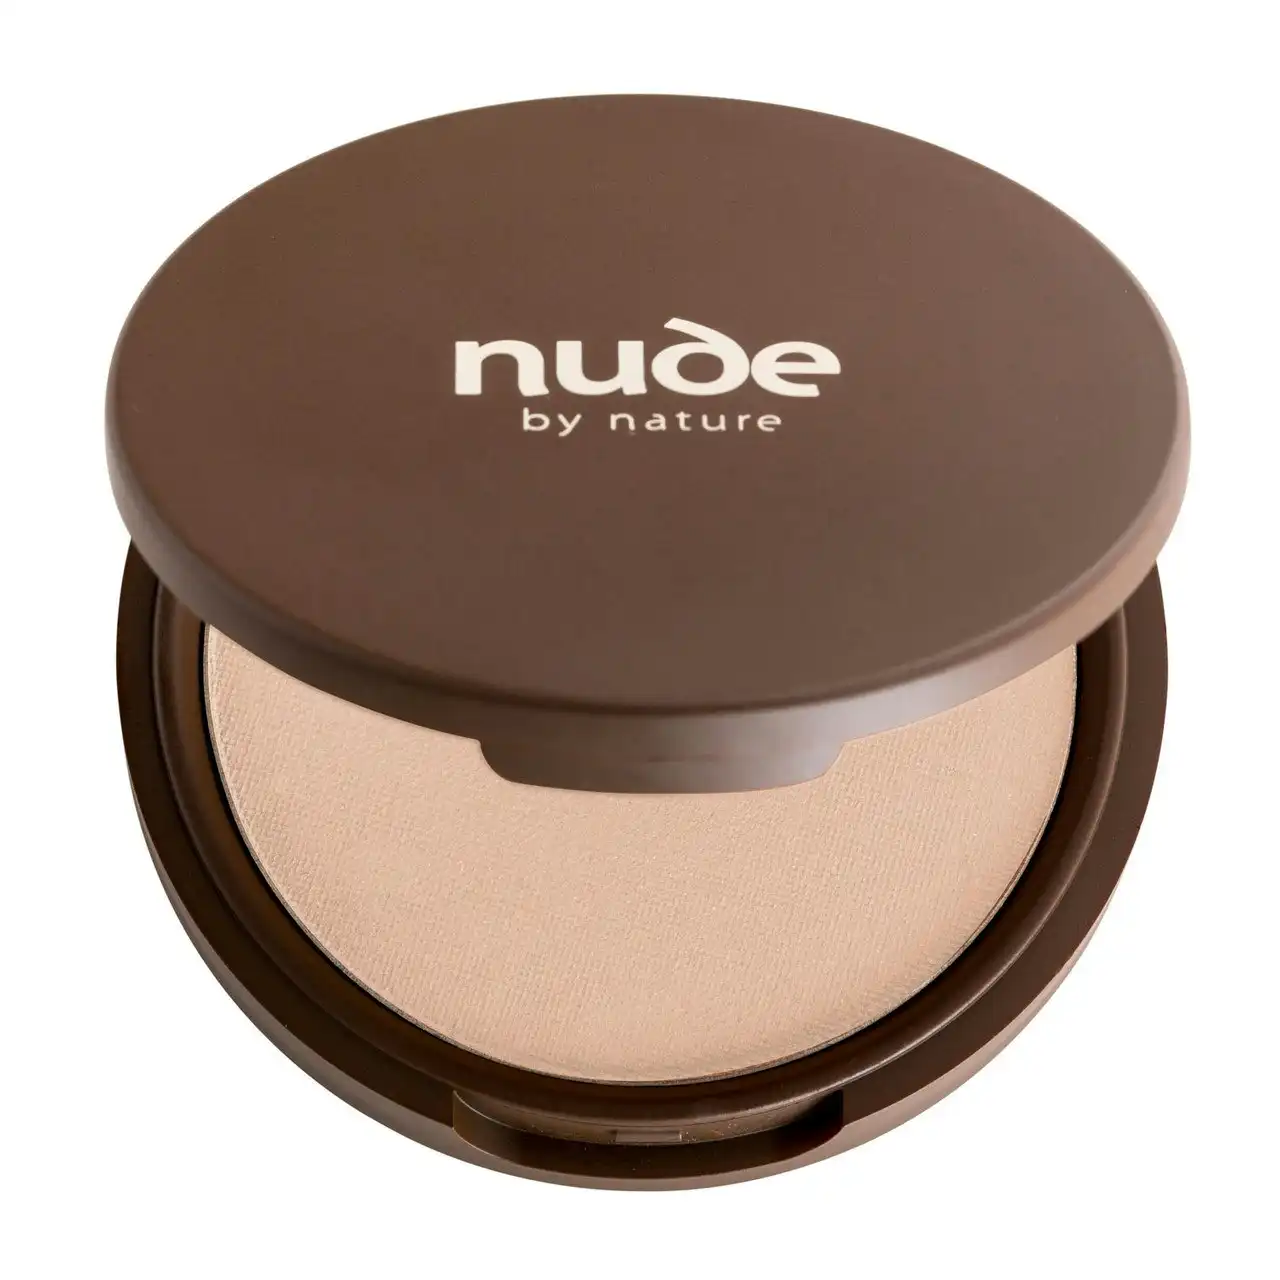 Nude by Nature Pressed Mineral Cover Foundation 10g Light Medium